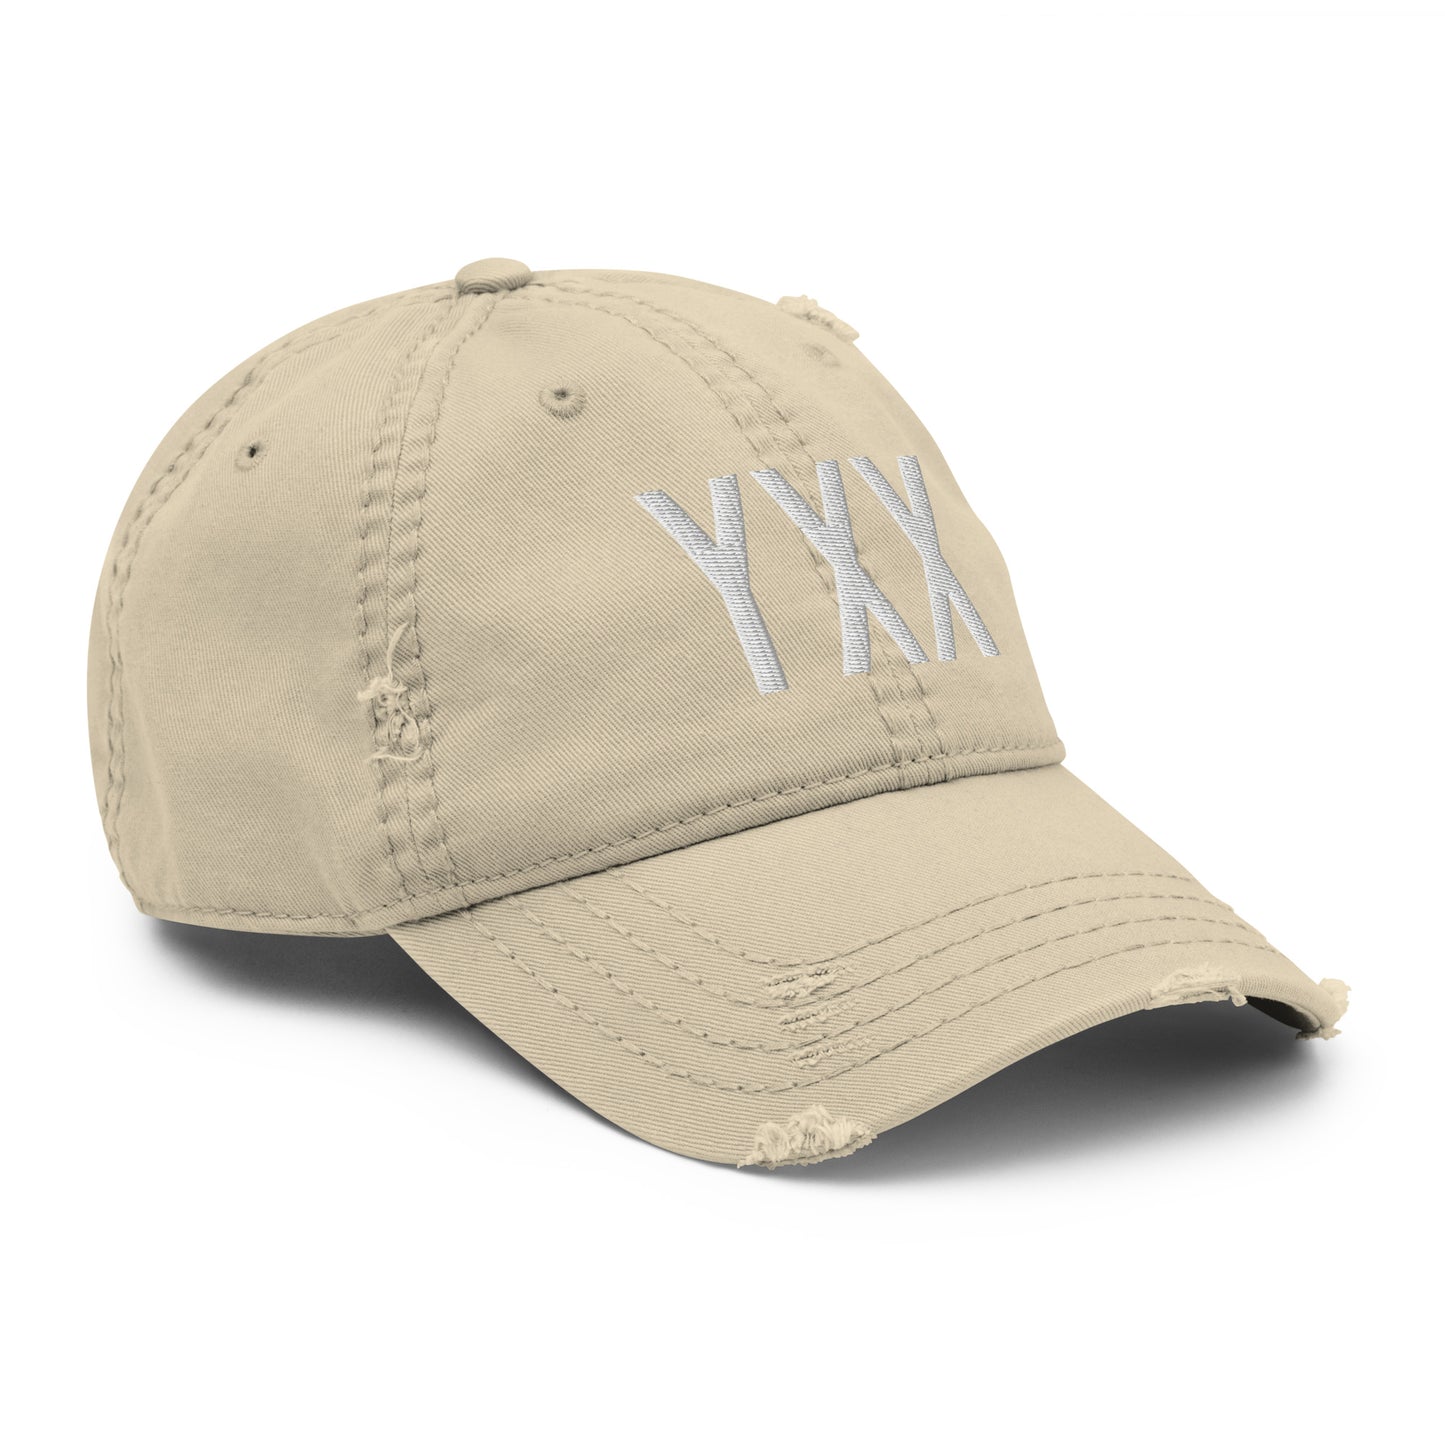 Airport Code Distressed Hat - White • YXX Abbotsford • YHM Designs - Image 20